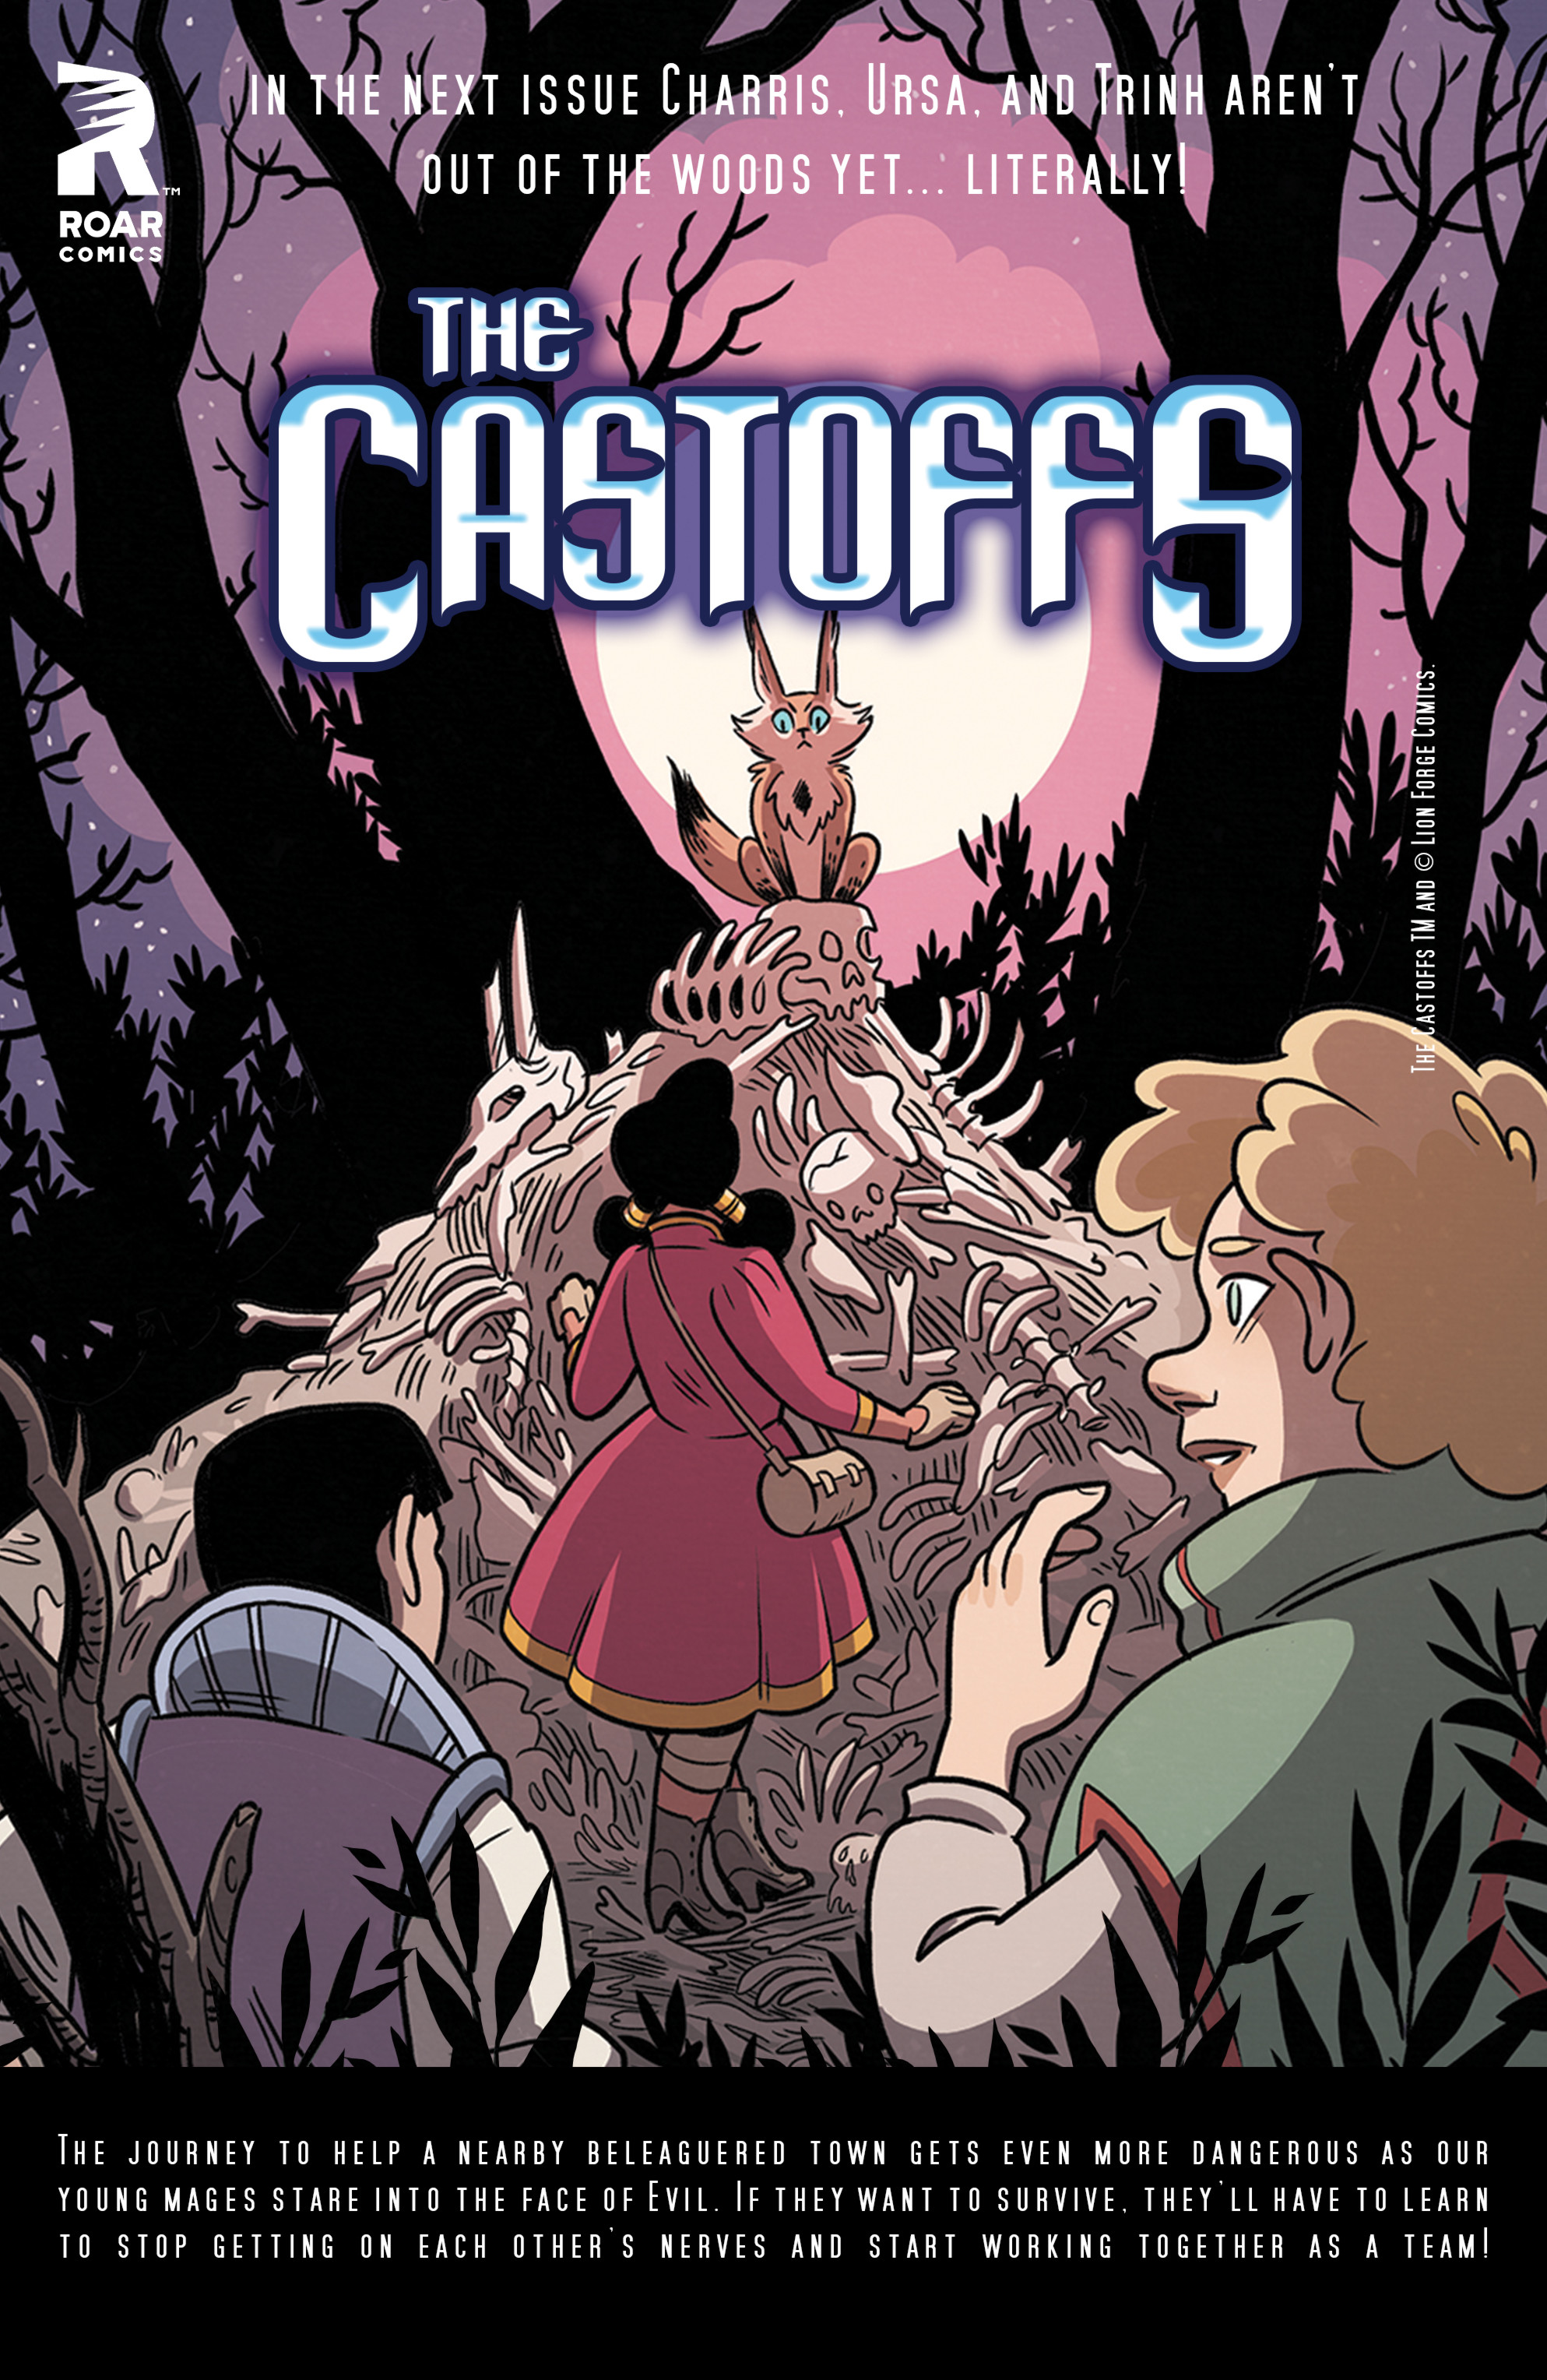 Read online The Castoffs comic -  Issue #1 - 27